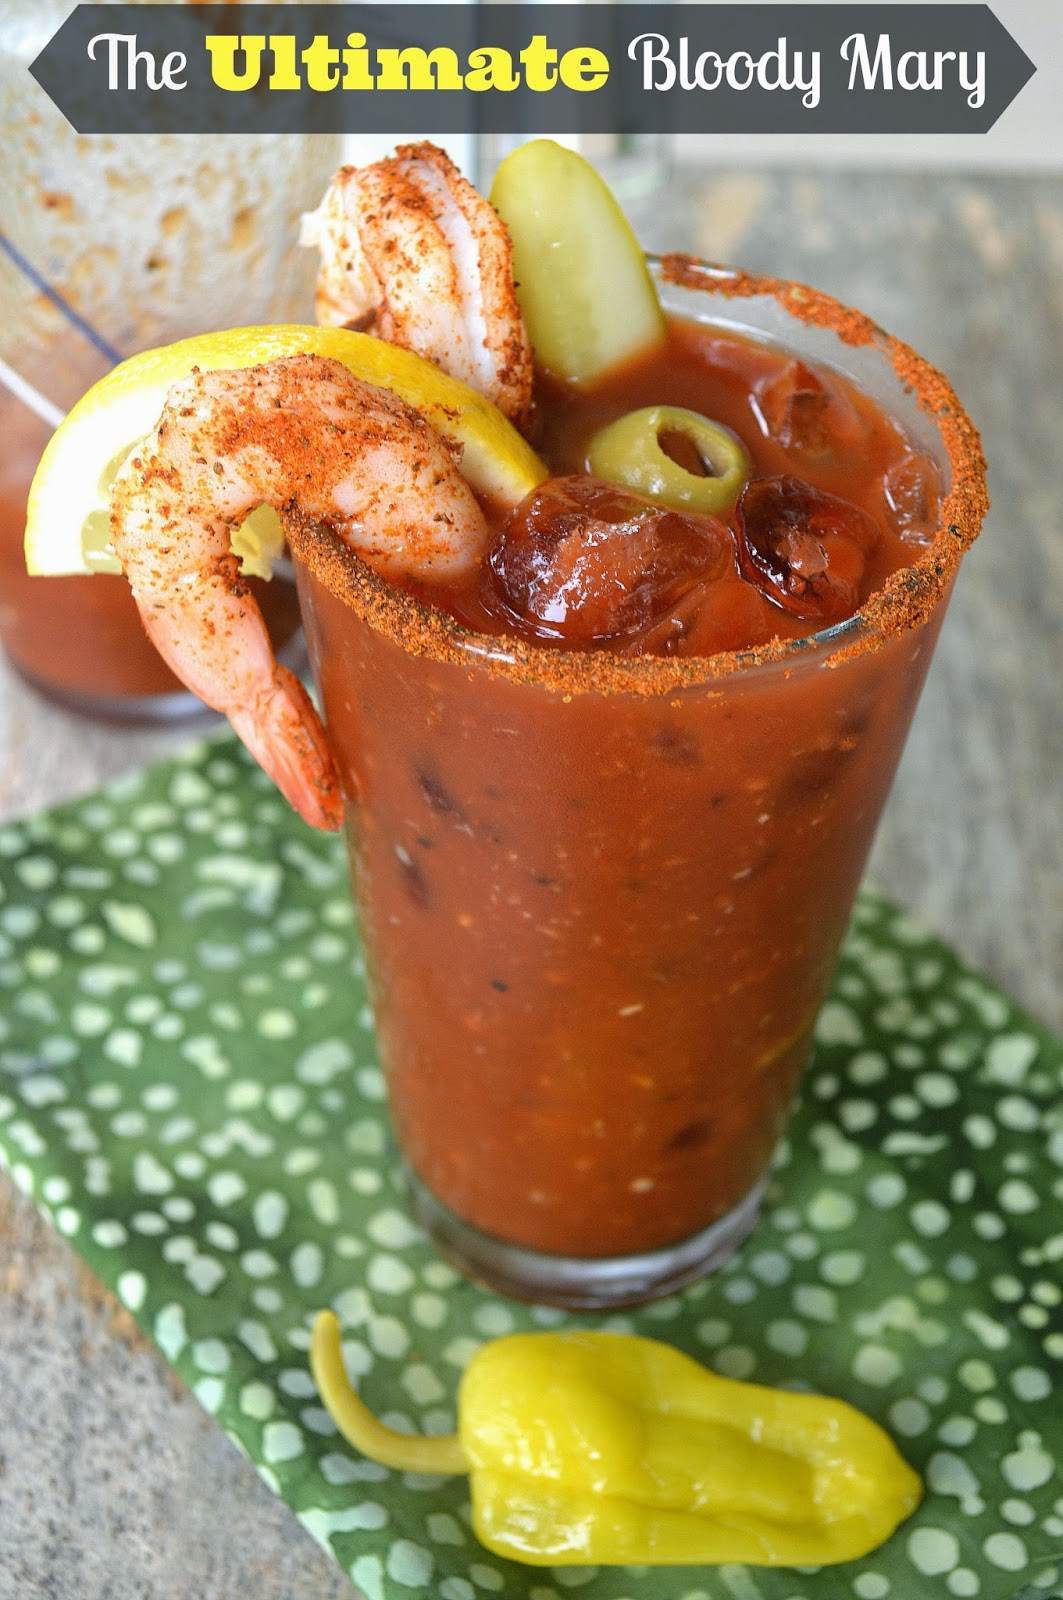 https://soufflebombay.com/wp-content/uploads/2014/05/The-Ultimate-Bloody-Mary.jpg